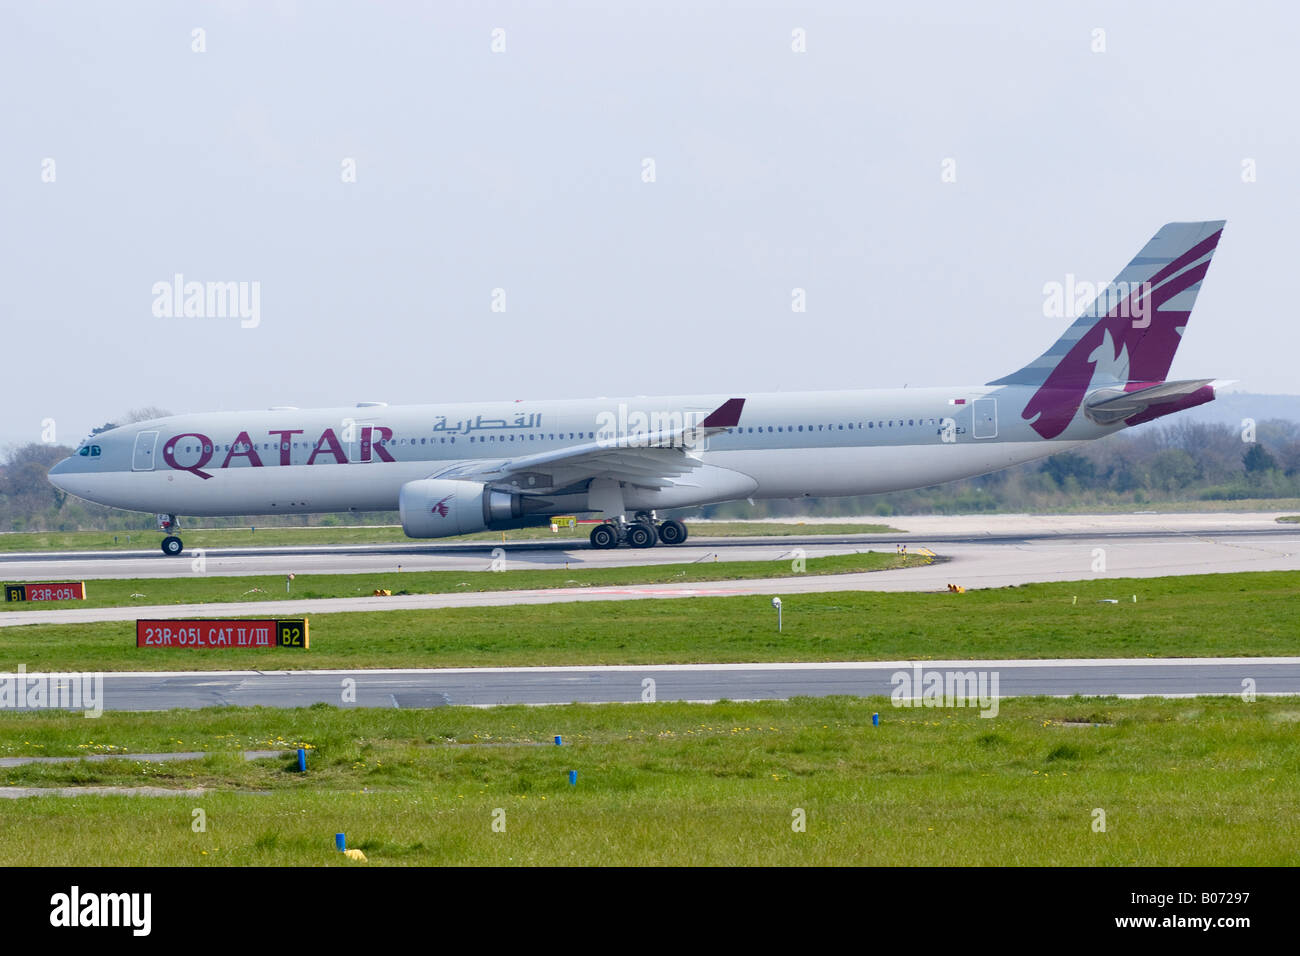 Qatar Airways Airbus A330 [A330-302] Taking-off From Runway 05 at Manchester Ringway Airport England United Kingdom Stock Photo